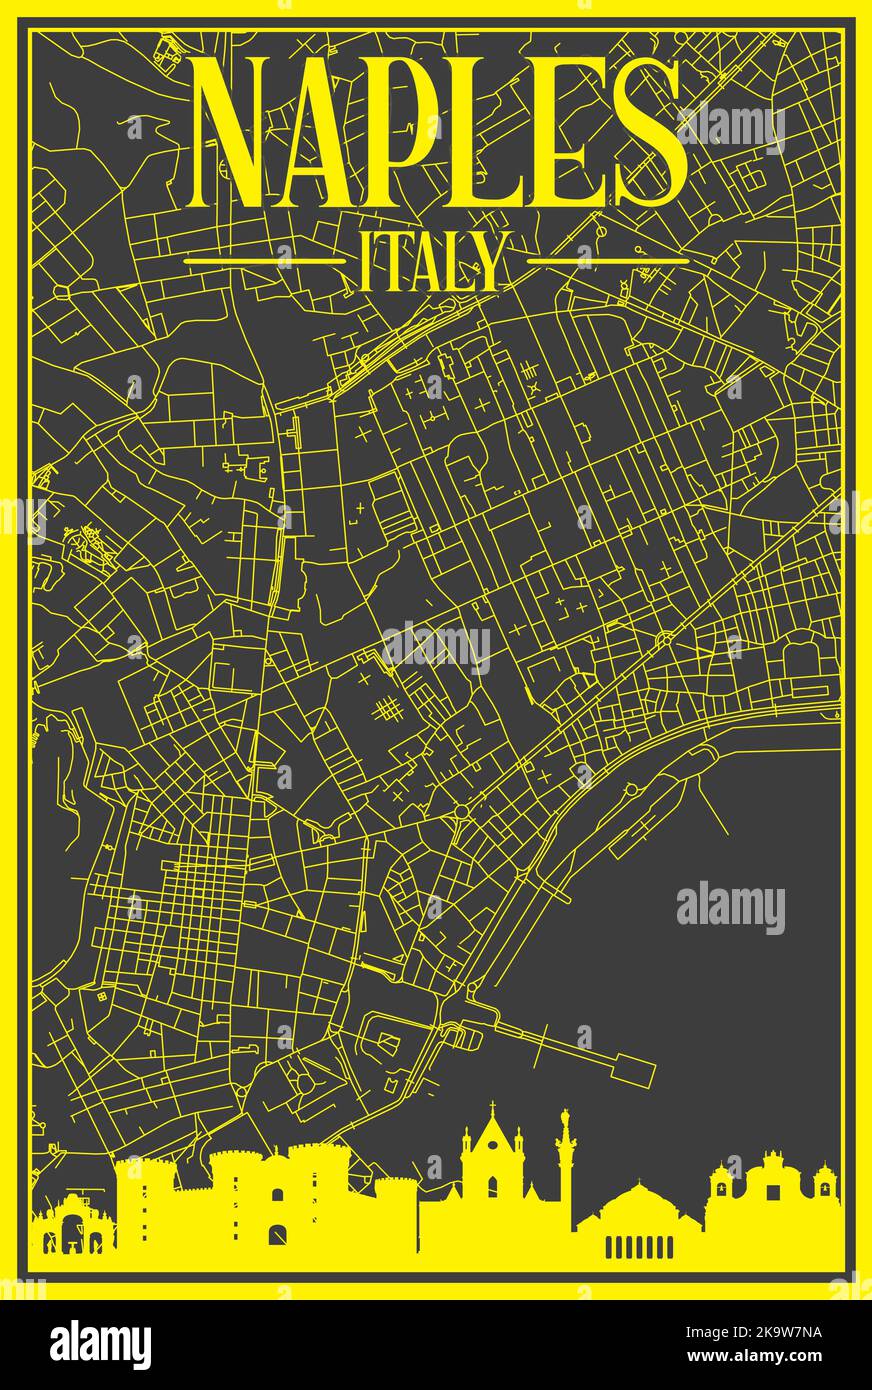 Hand-drawn downtown streets network printout map of NAPLES, ITALY Stock Vector